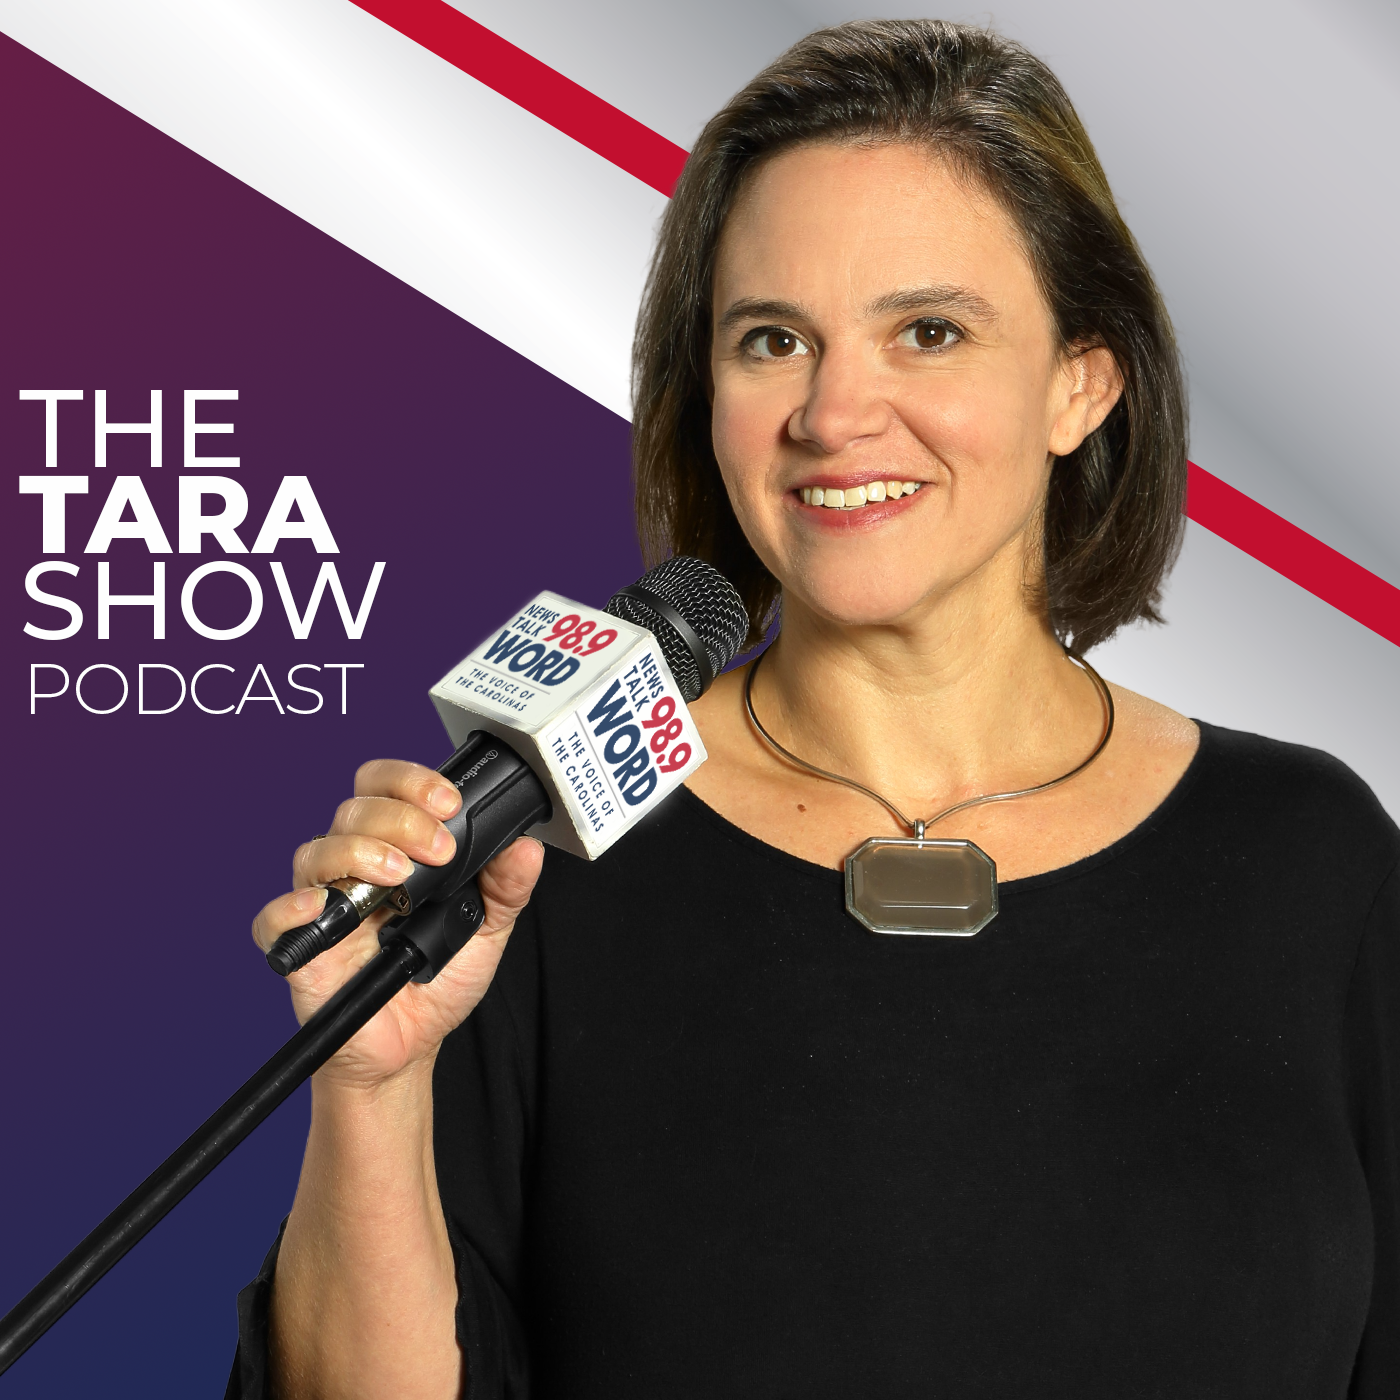 Hour 3: The Tara Show - “Walls Closing in on Biden” “Lies Traded for Truth” “Biden Trying to Start WWIII” ”Peace in the Middle East” 